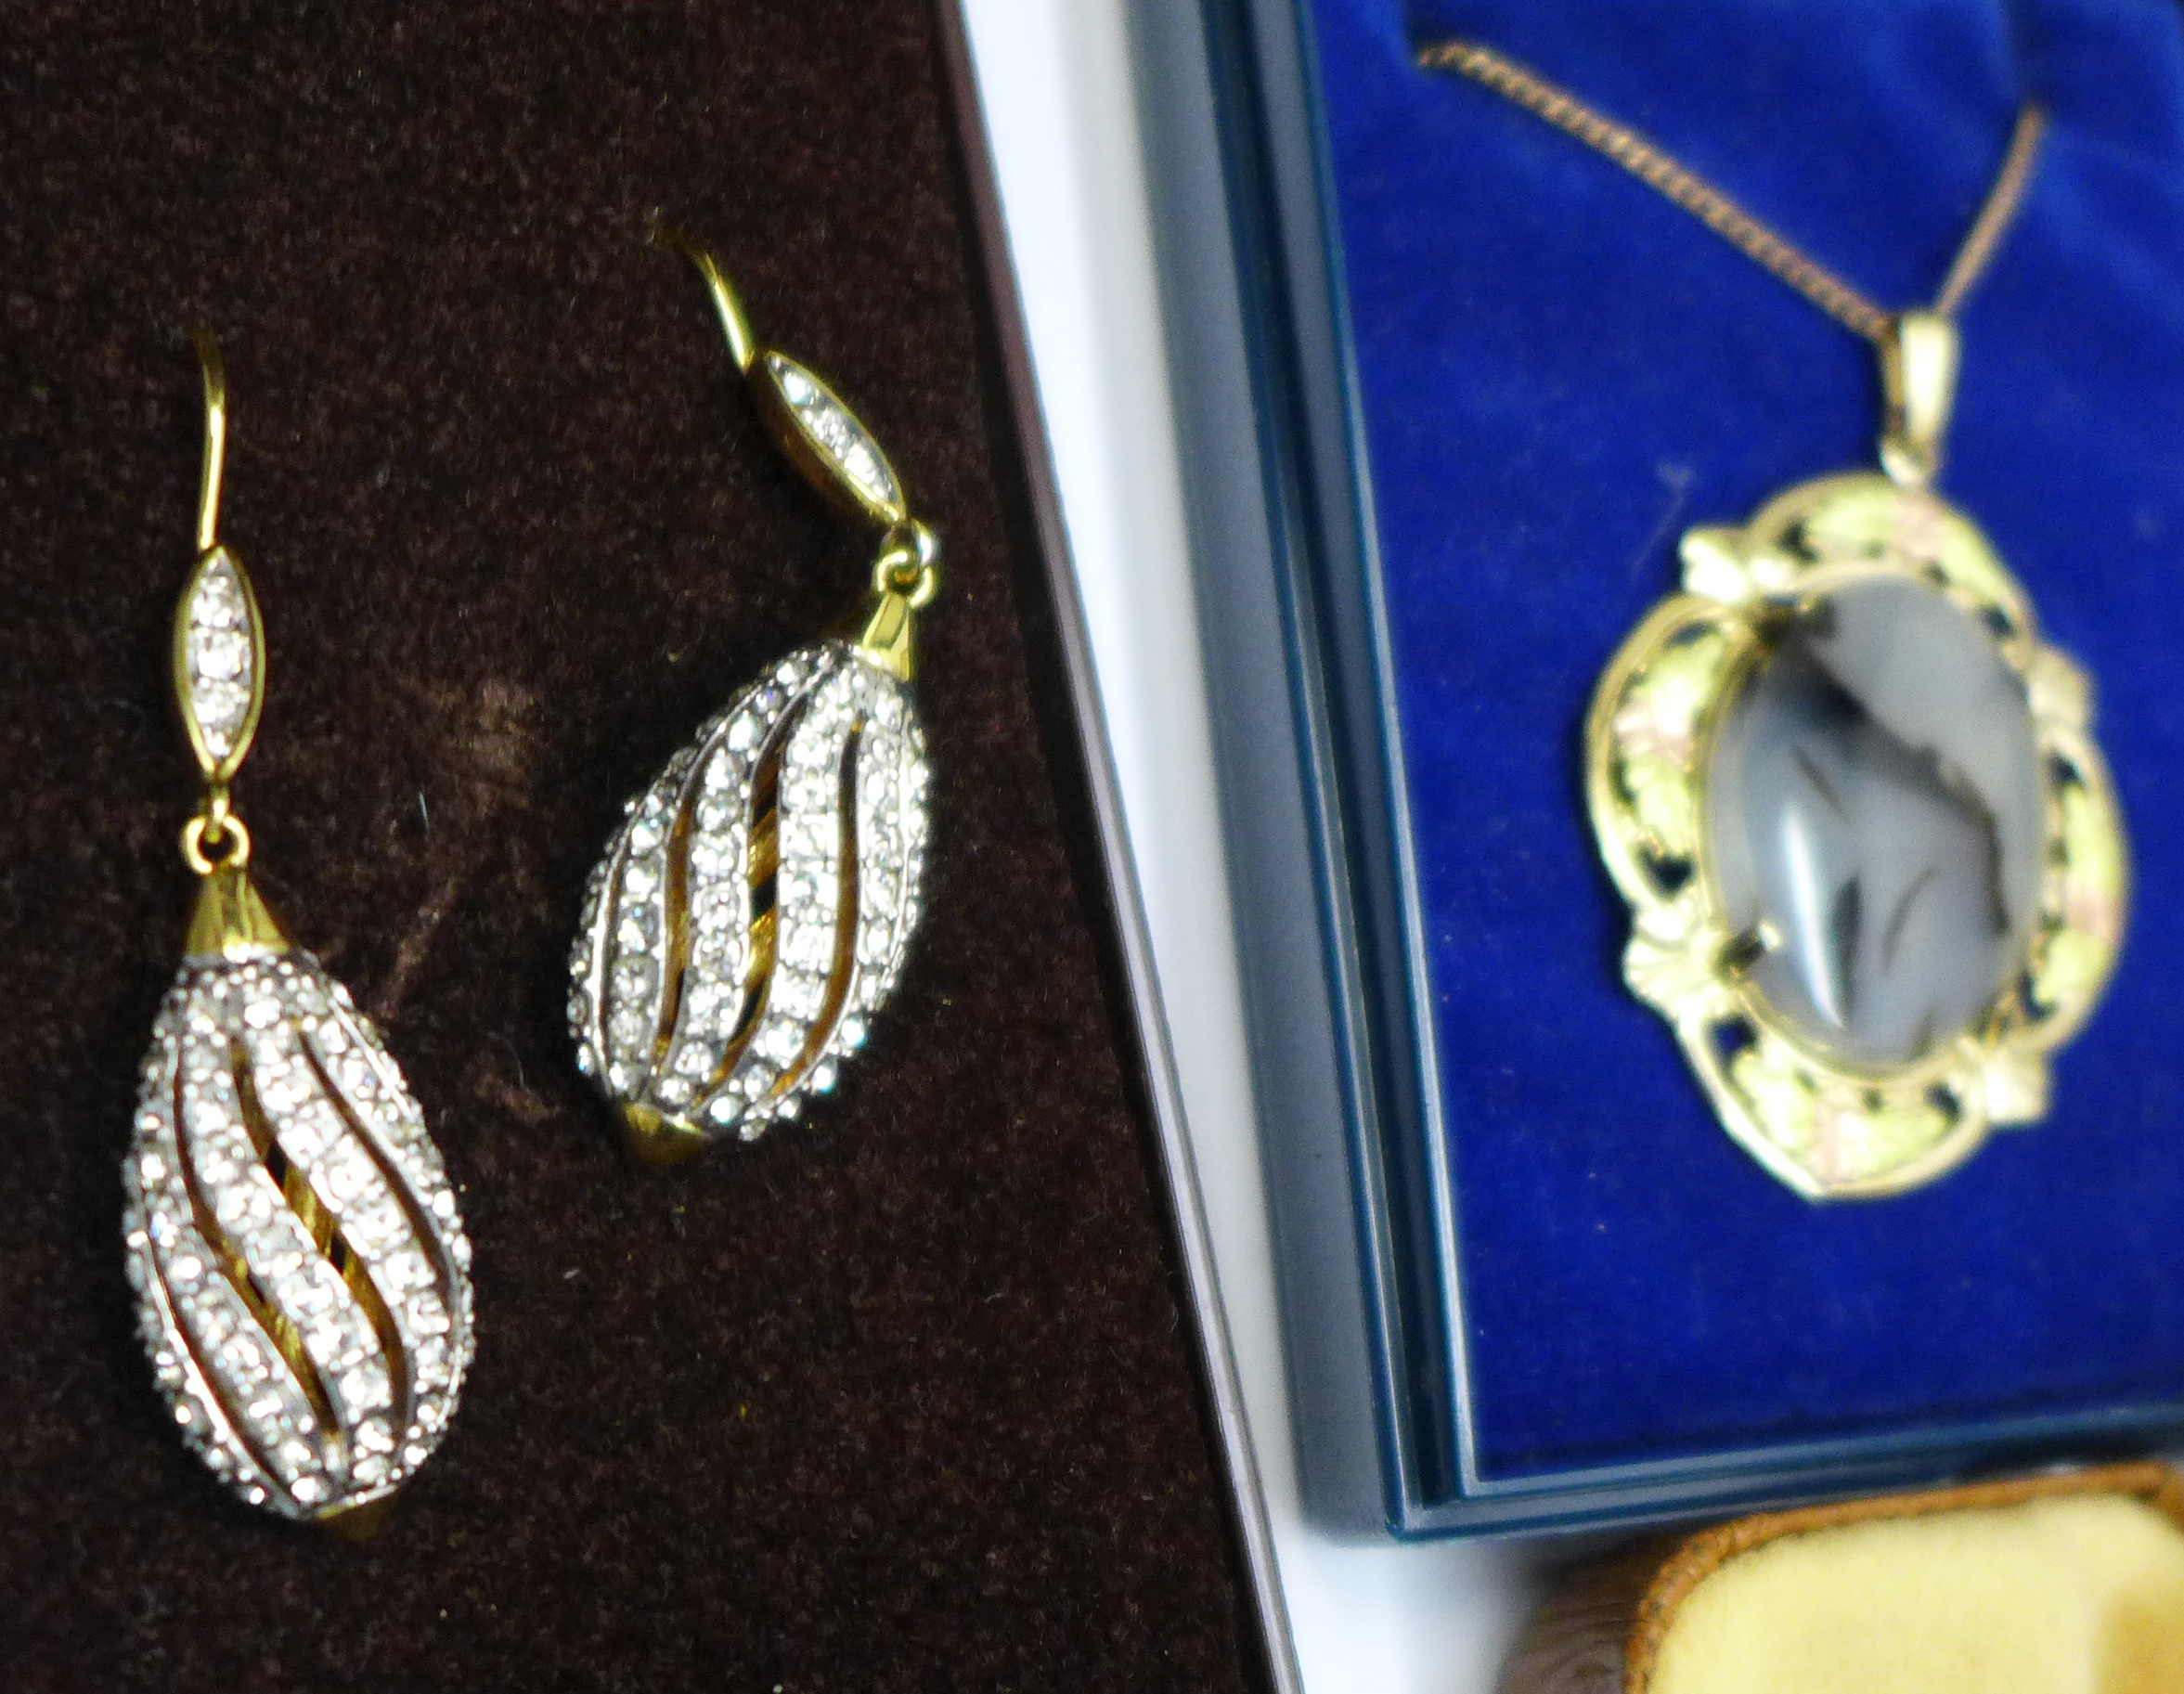 A Swarovski pendant and chain, agate slice pendant and chain, cufflinks and other jewellery - Image 3 of 3